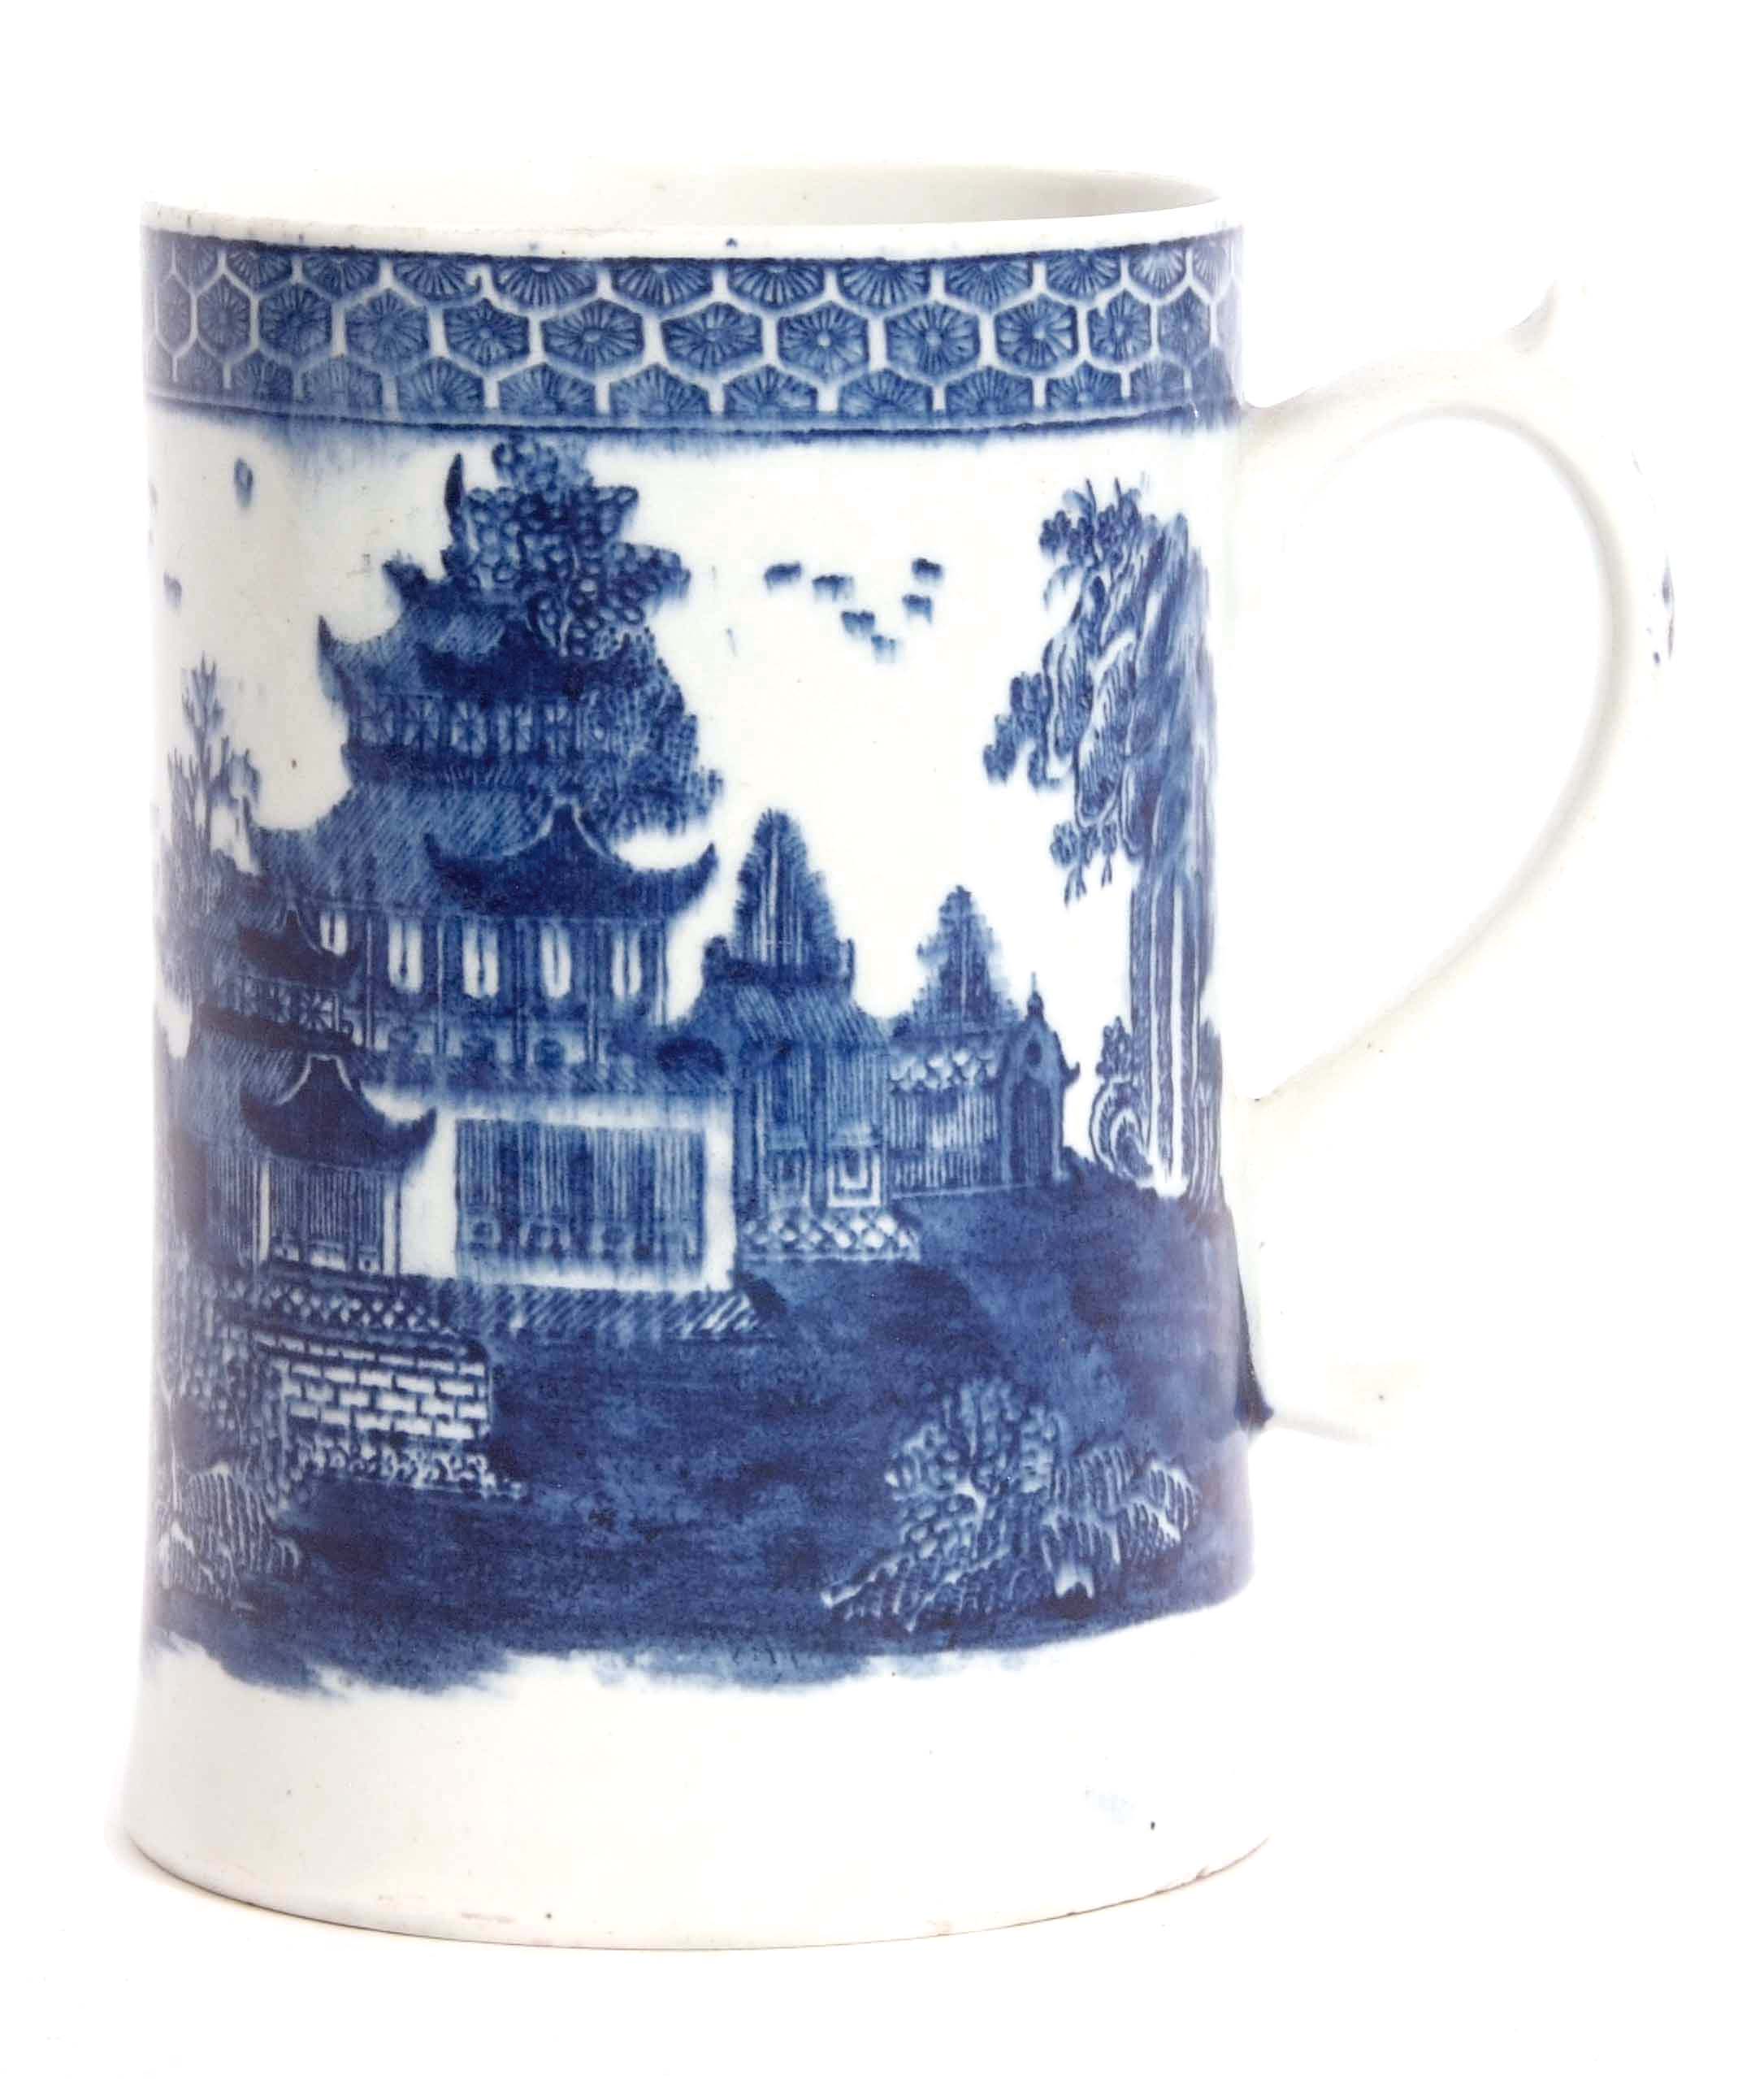 Impressive large Lowestoft tankard, circa 1780, printed in underglaze blue with the so-called temple